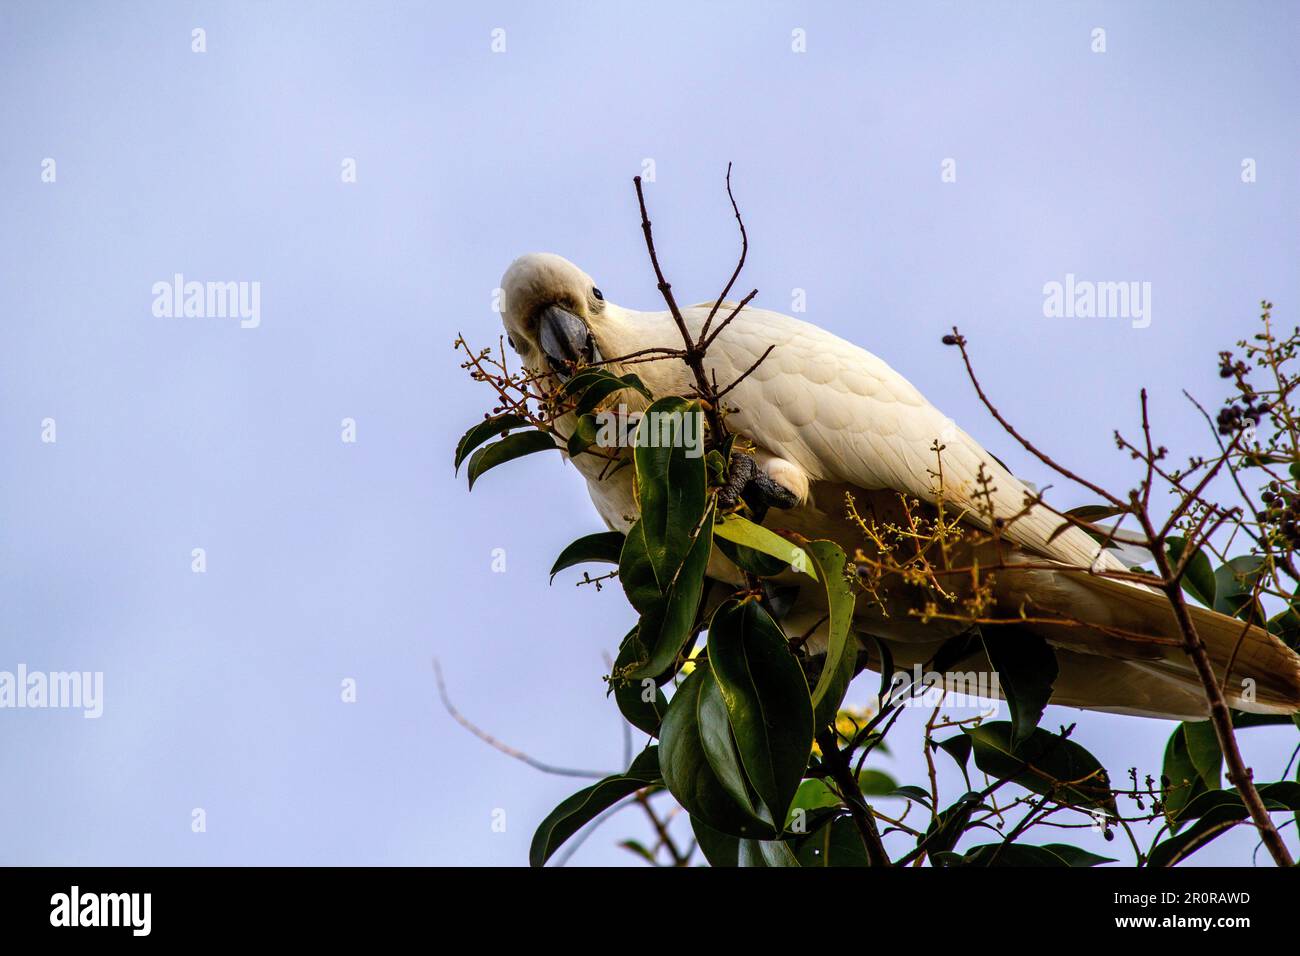 May 8, 2023, Sydney, New South Wales, Australia: Sulphur-Crested Cockatoos (Cacatua galerita) eating fruits from a tree in Sydney, New South Wales, Australia. The Sulphur-Crested Cockatoo is a relatively large white cockatoo with a spectacular plumed yellow crest and dark bill. It is found in wooded habitats in Australia, New Guinea, and some of the islands of Indonesia. Sulphur Crested Cockatoos have multiple subspecies like Lesser, Medium, and Greater Sulphur Crested Cockatoo; all belong to the same Genus (Cacatua) and Phylum. Since all subspecies of Sulphur Crested cockatoos look very simil Stock Photo